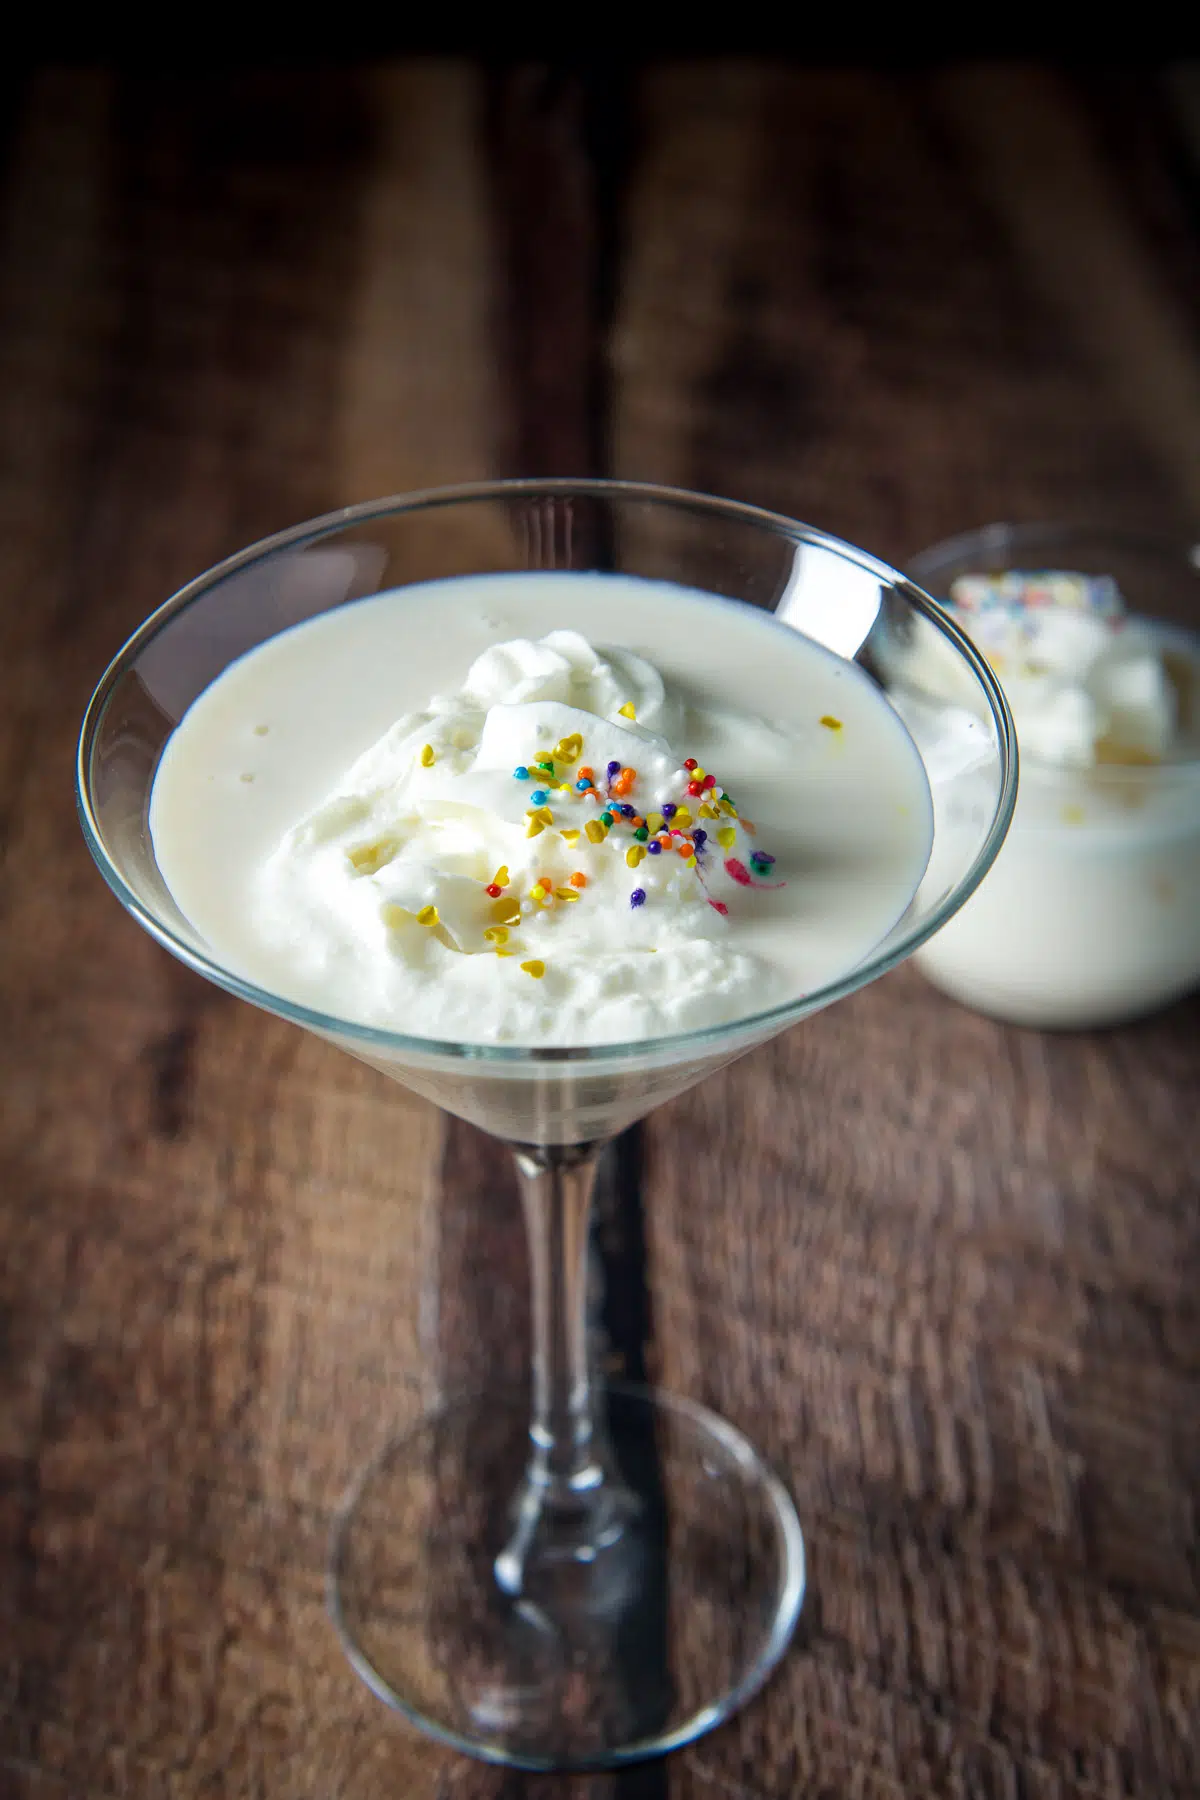 Closer view of the martini glass filled with the white chocolate cocktail with whipped cream and sprinkles